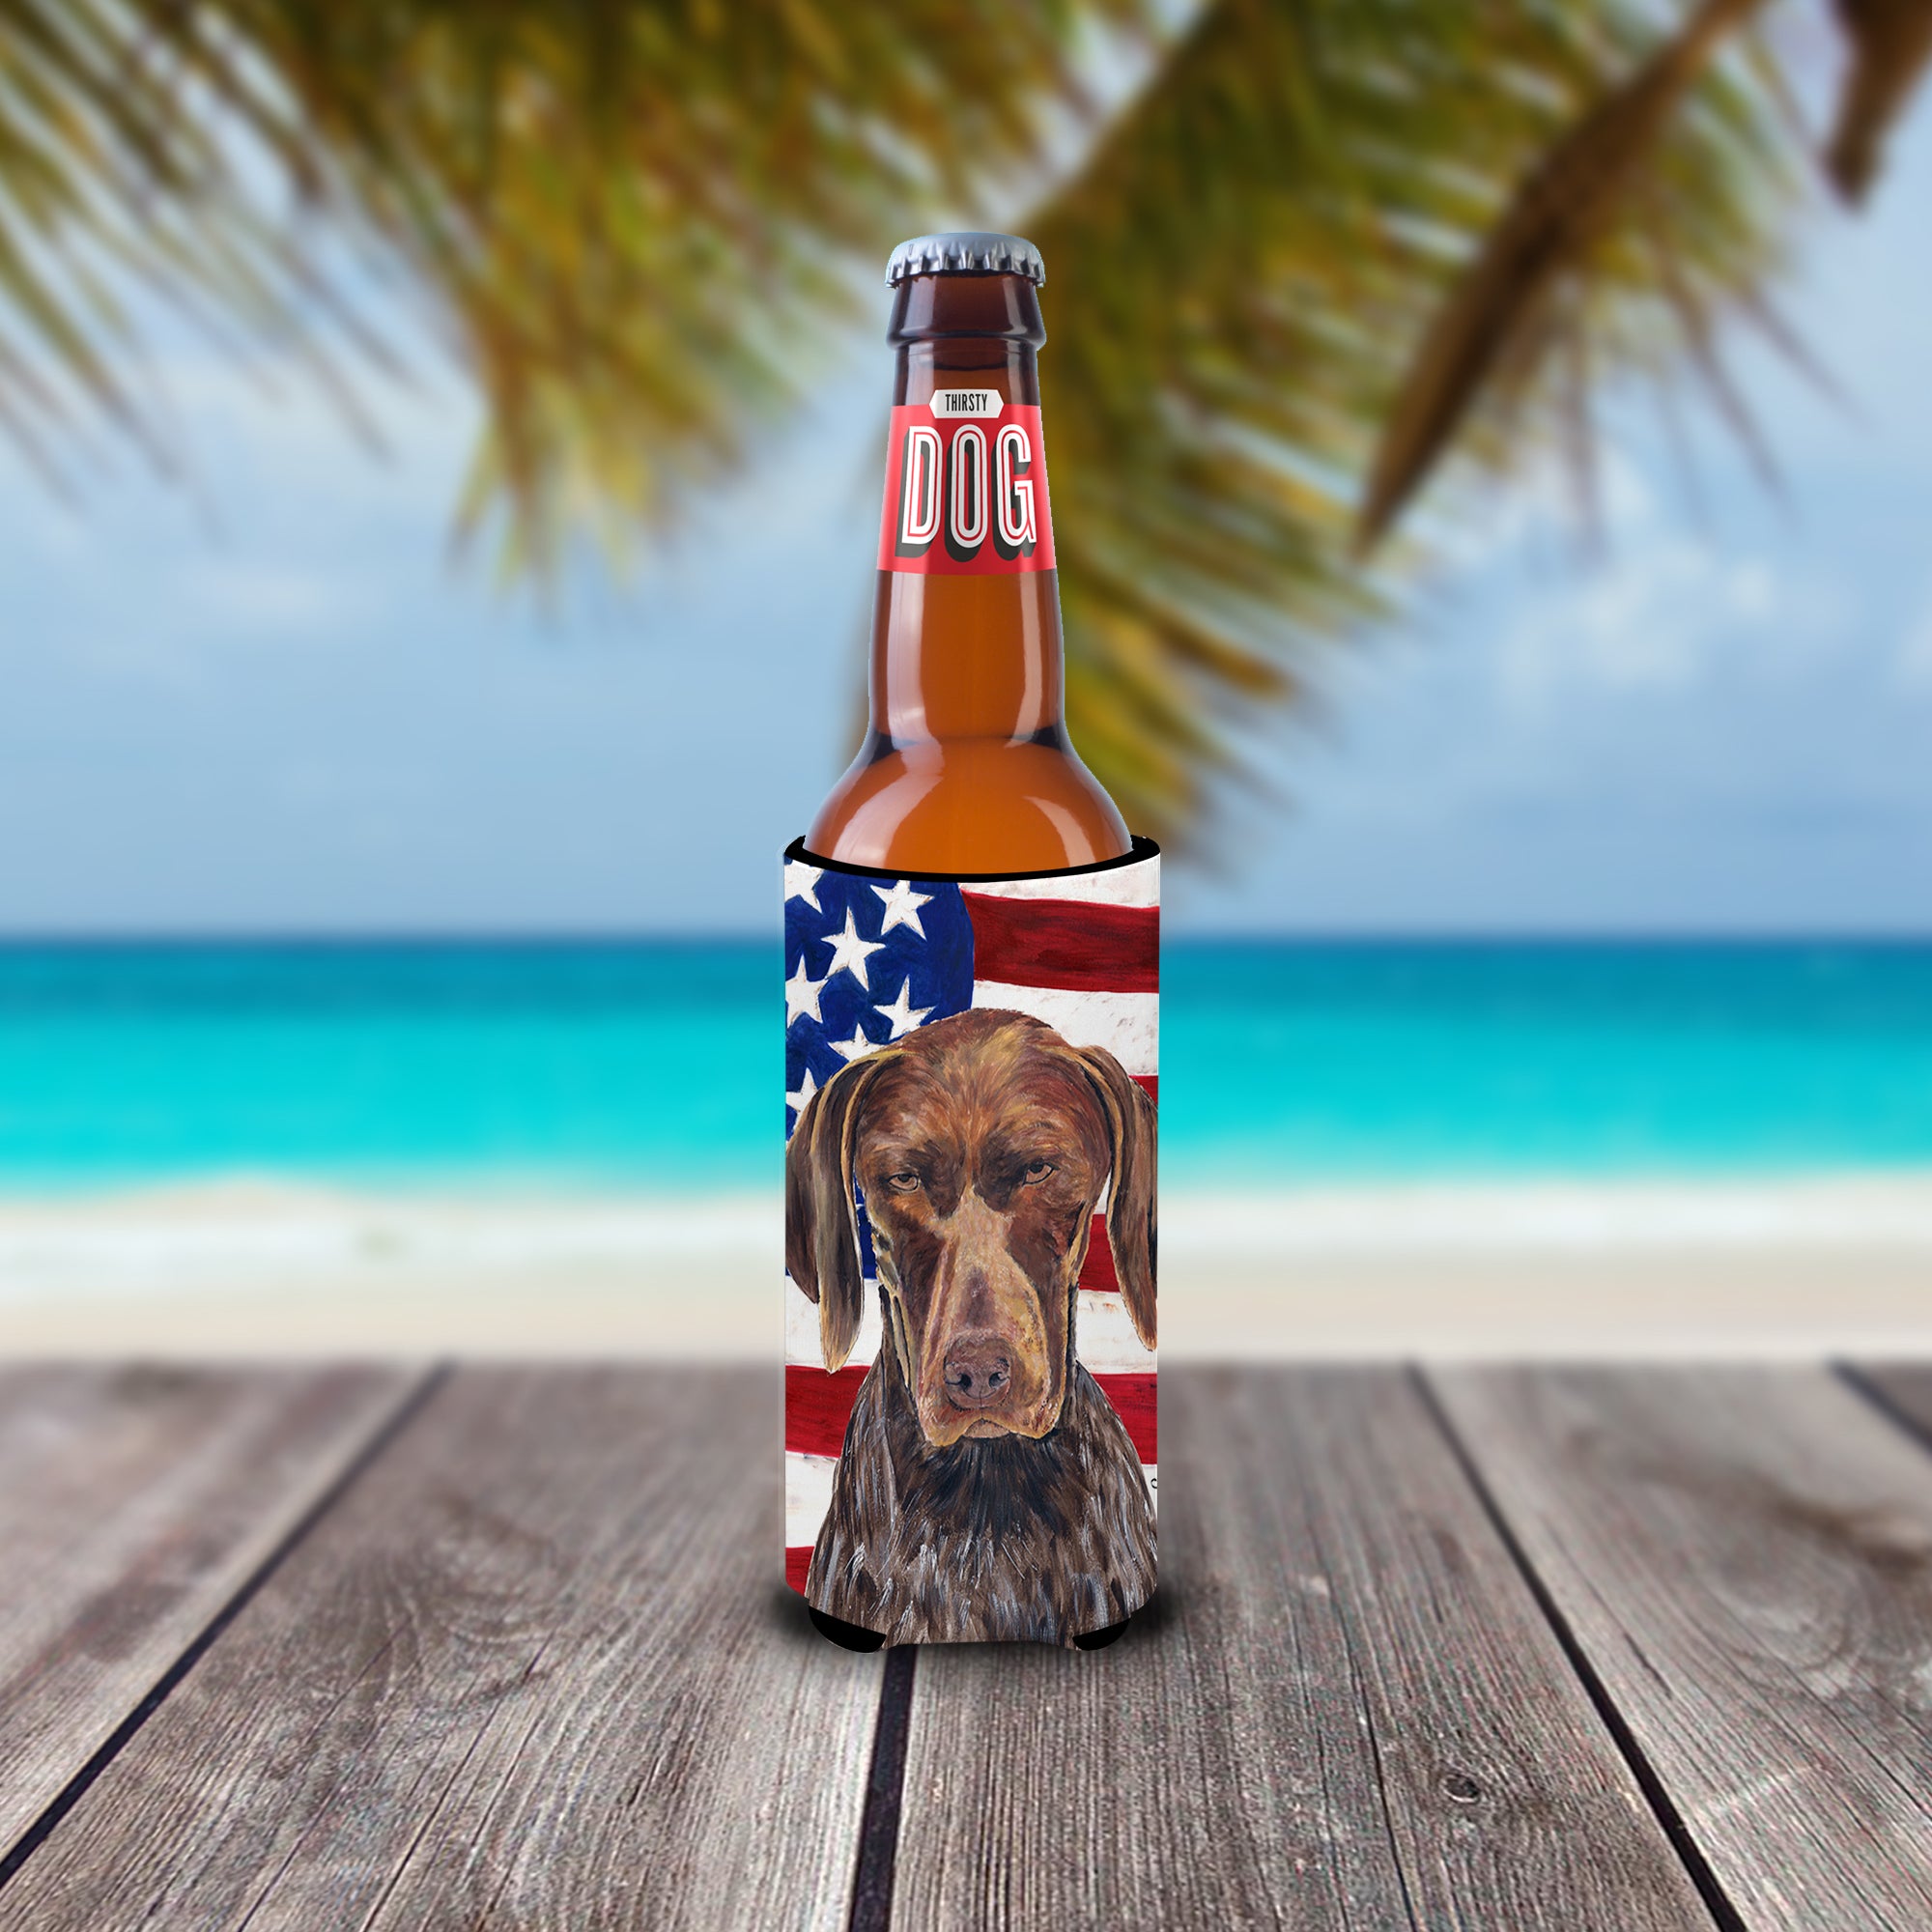 USA American Flag with German Shorthaired Pointer Ultra Beverage Insulators for slim cans SC9034MUK.